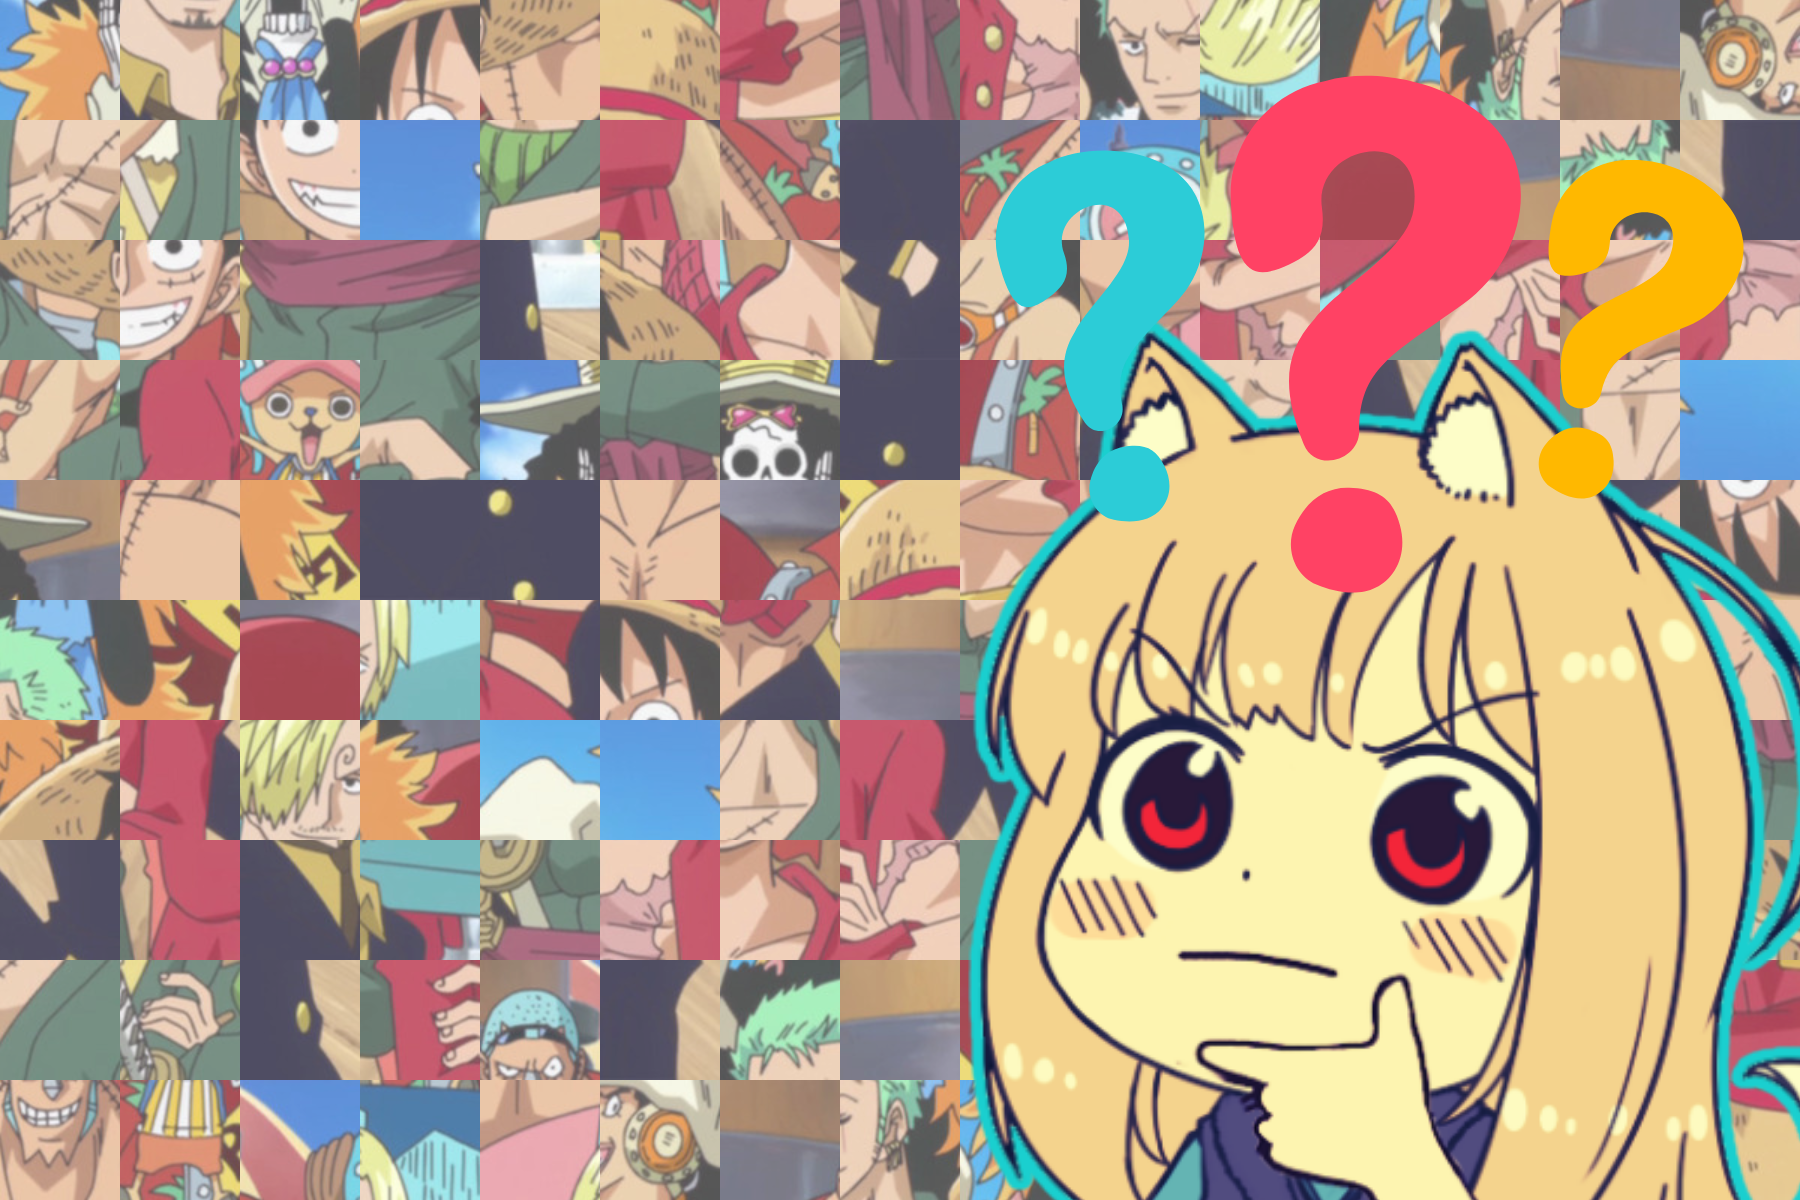 Can You Guess the 2020’s Anime from a Scrambled Picture? (HARD)